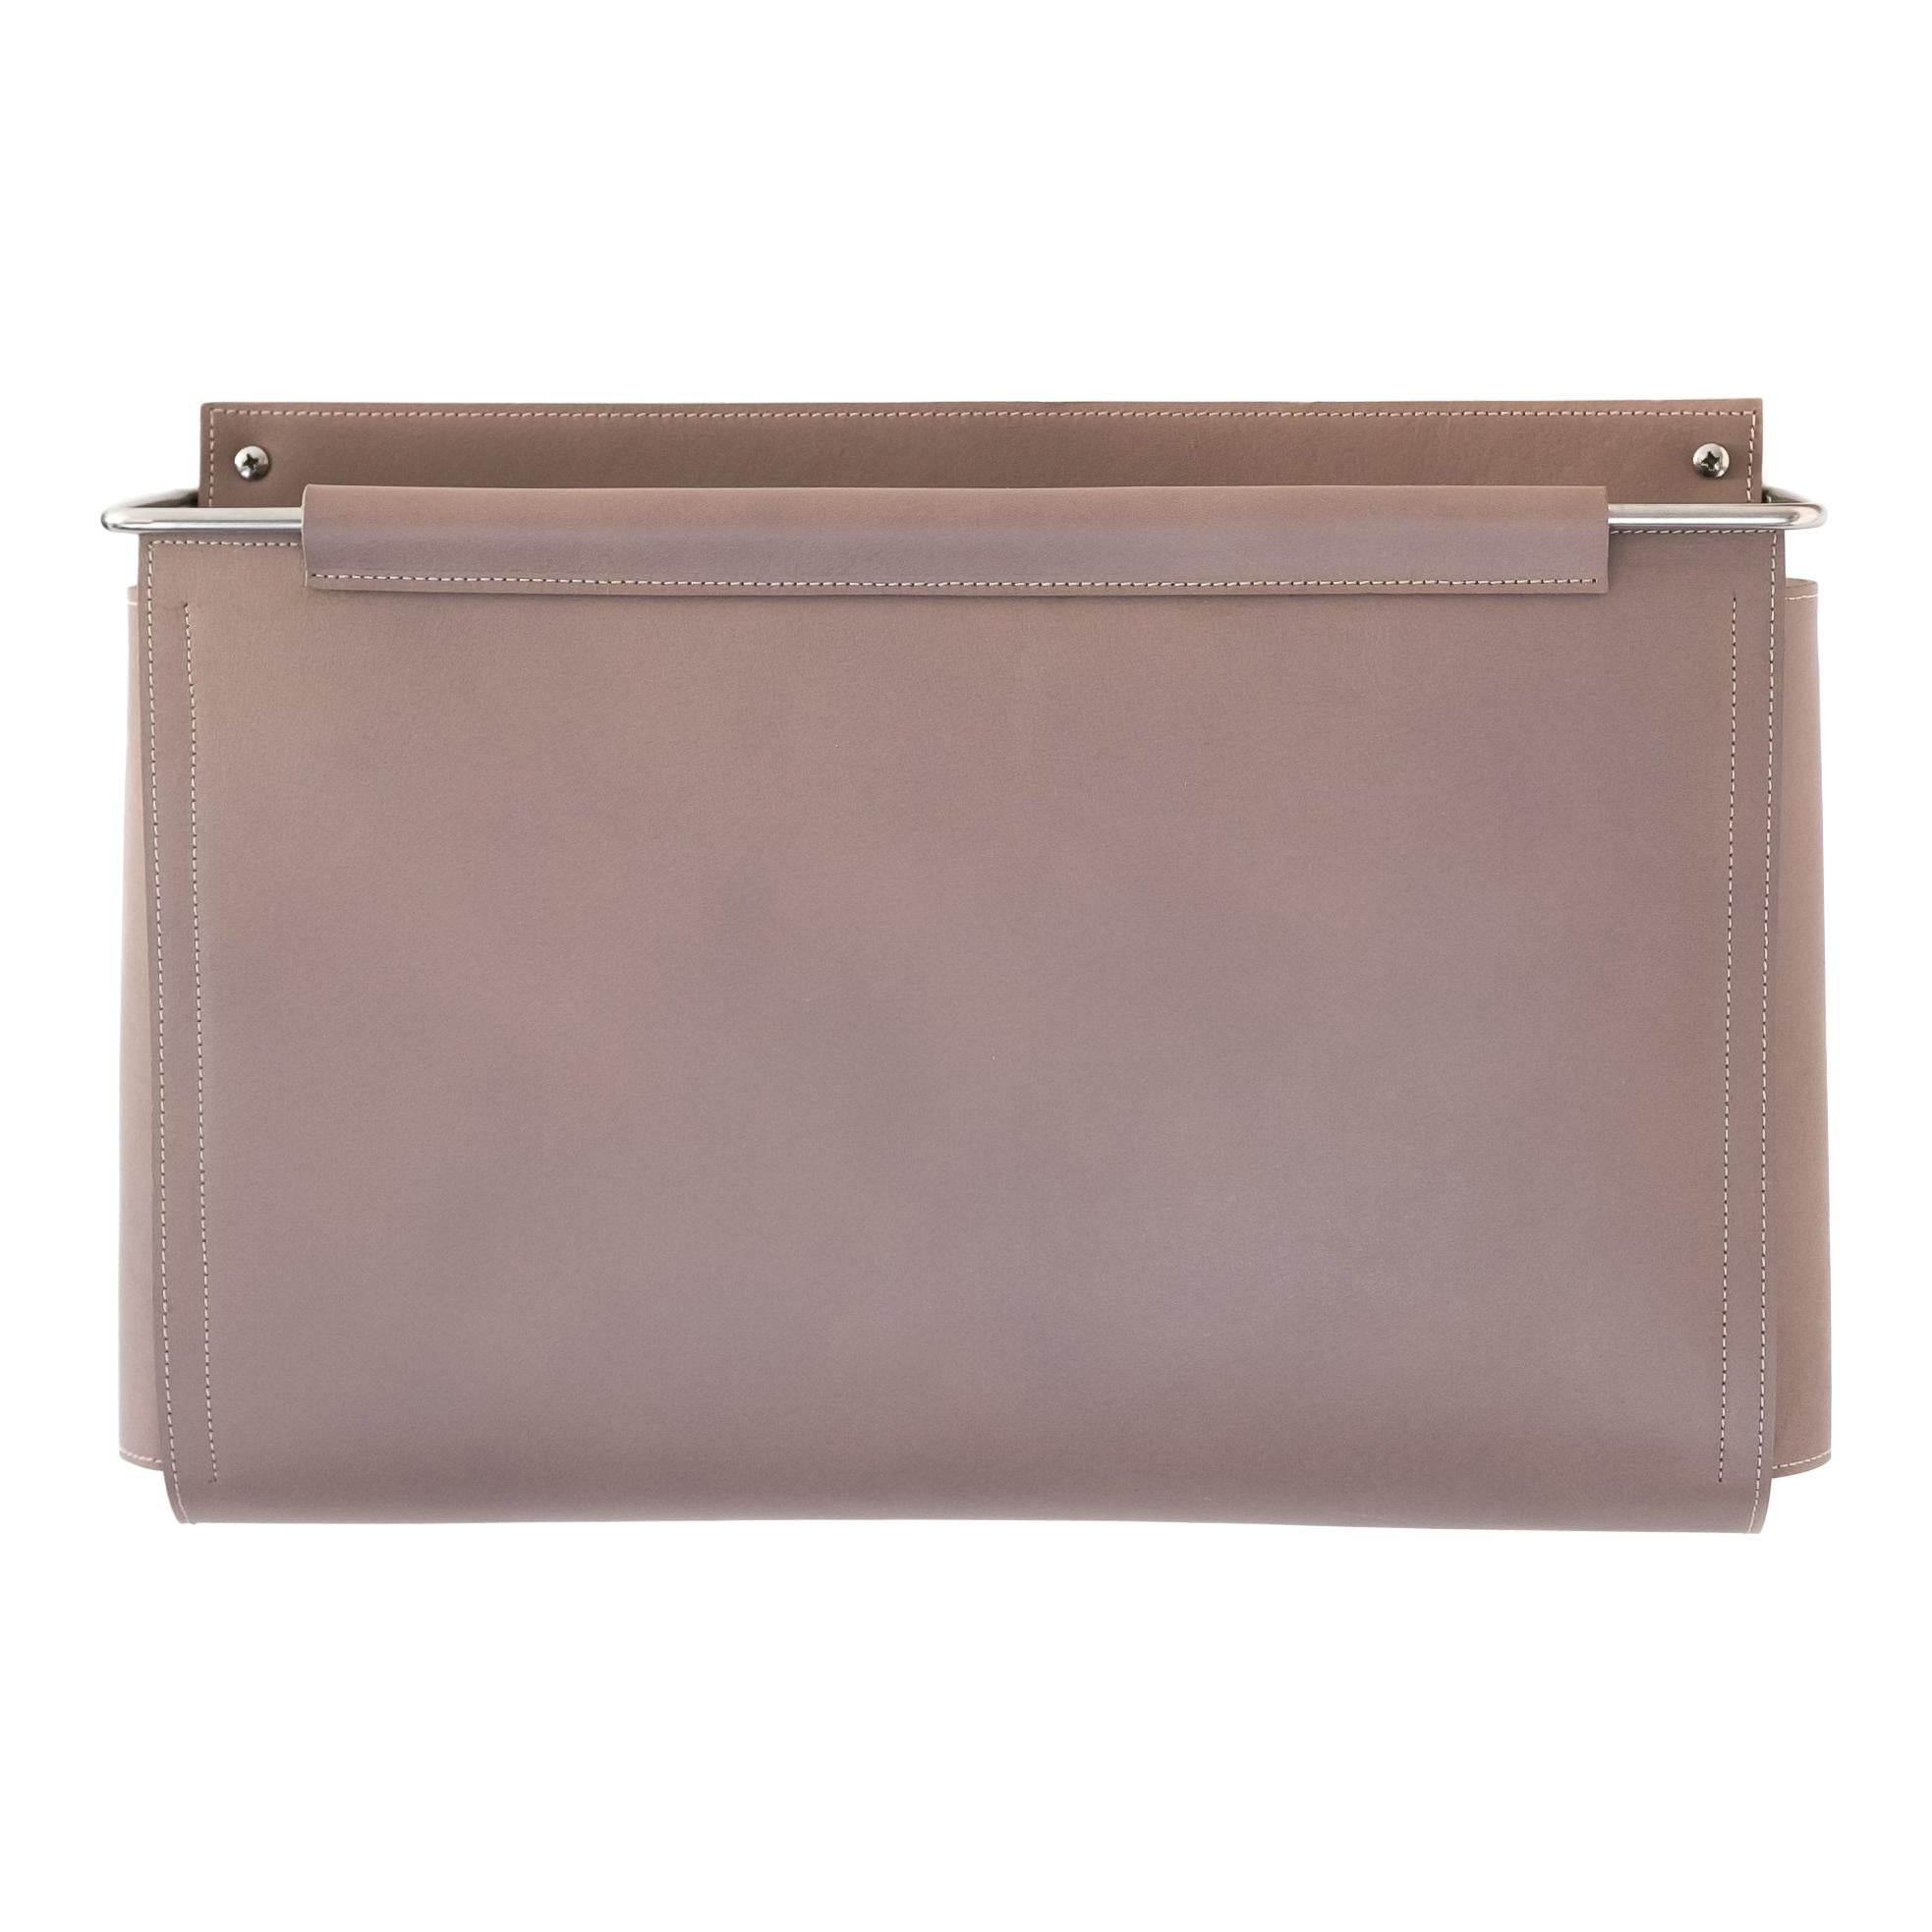 Wall Pocket 16"Lx3"Dx10"H in Taupe Leather and Stainless Steel by Moses Nadel